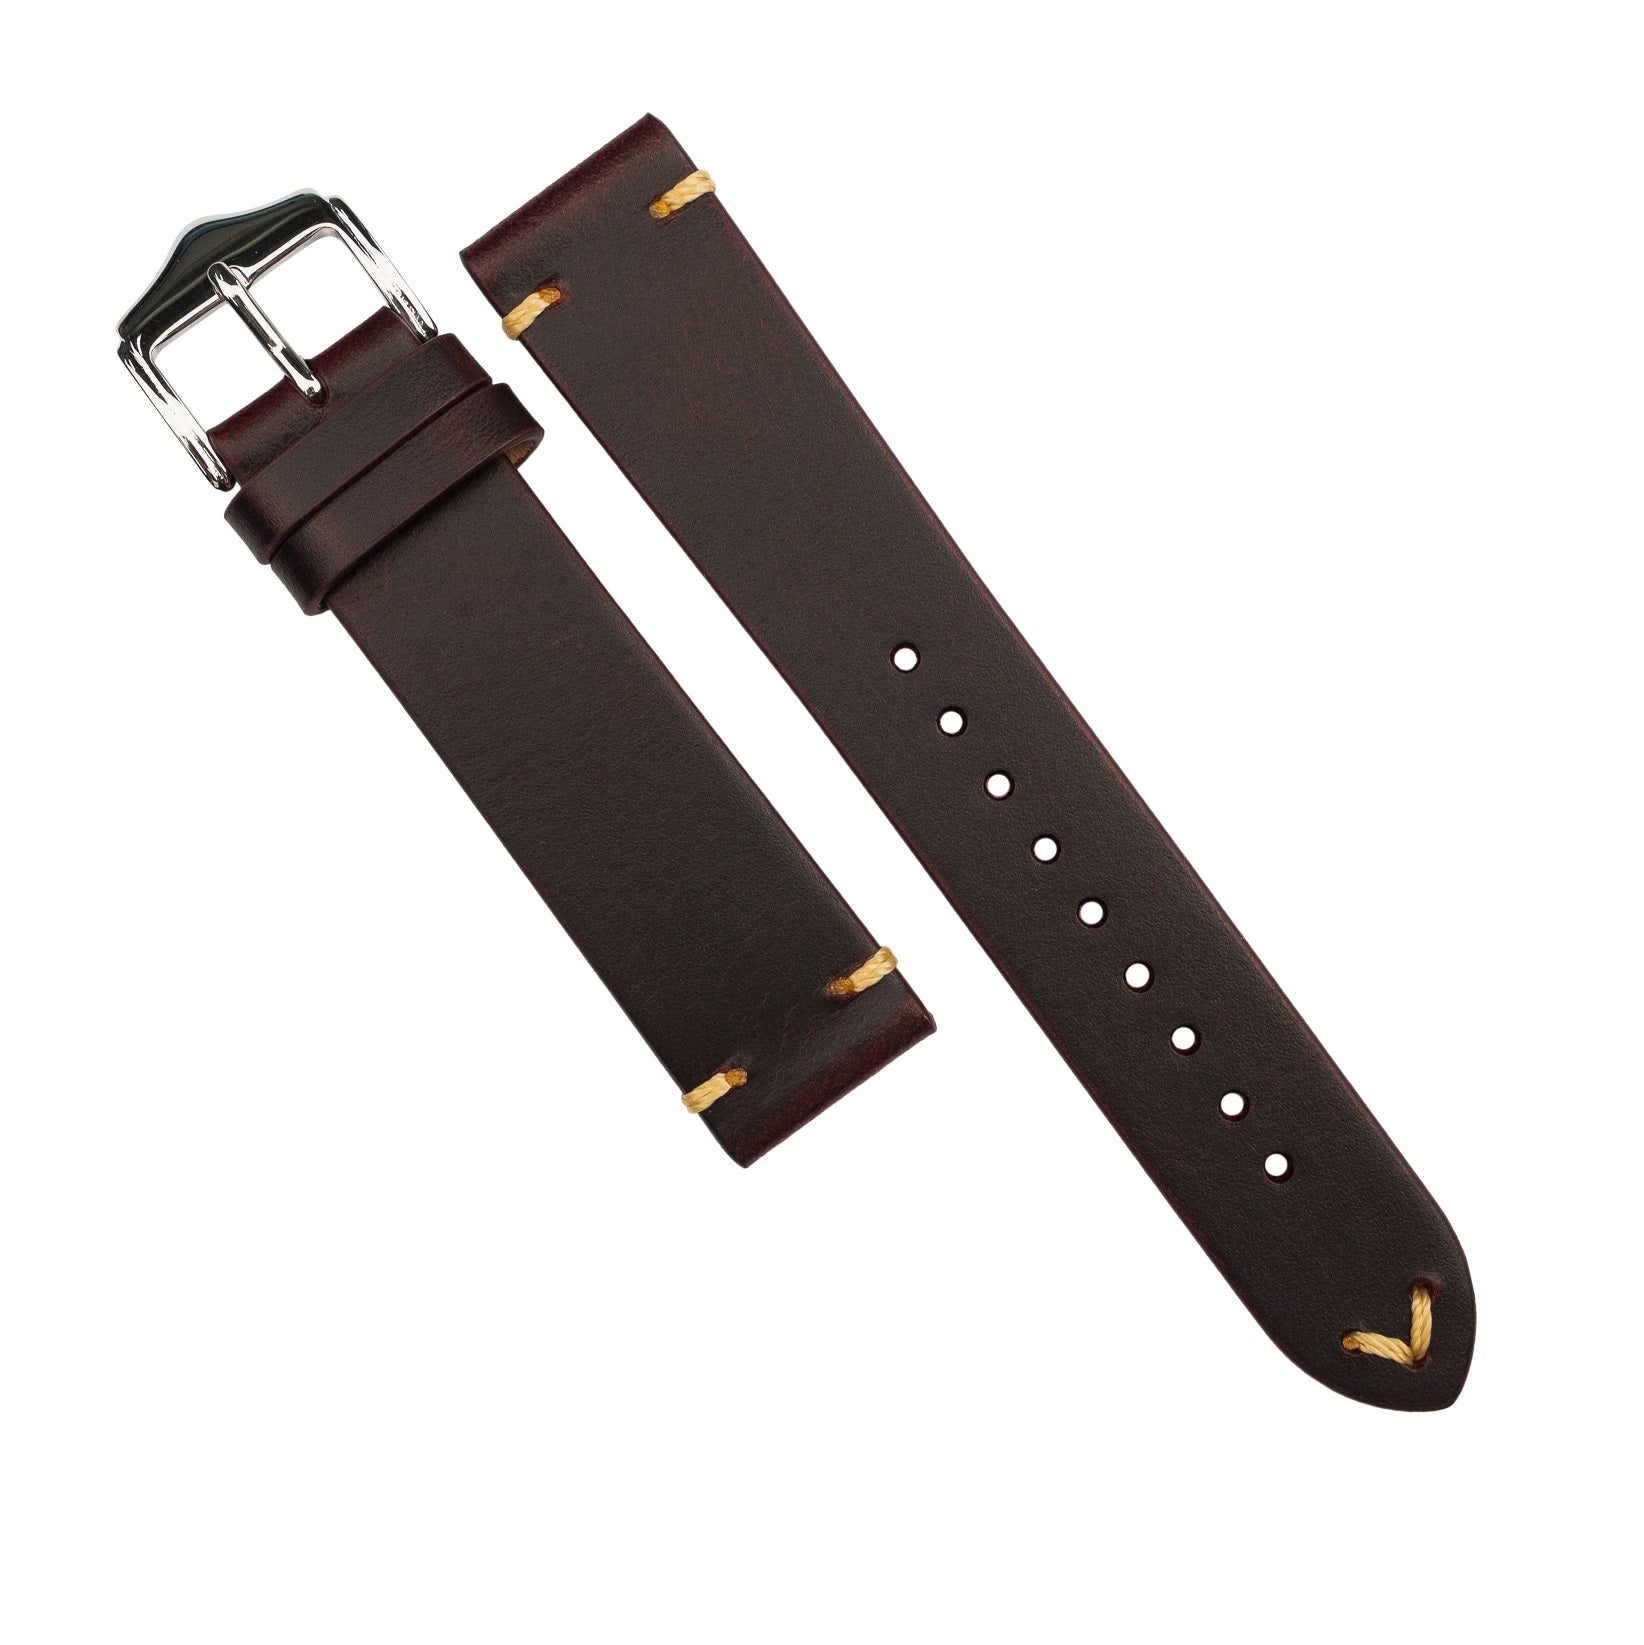 Premium Vintage Oil Waxed Leather Watch Strap in Maroon (18mm) - Nomad Watch Works SG